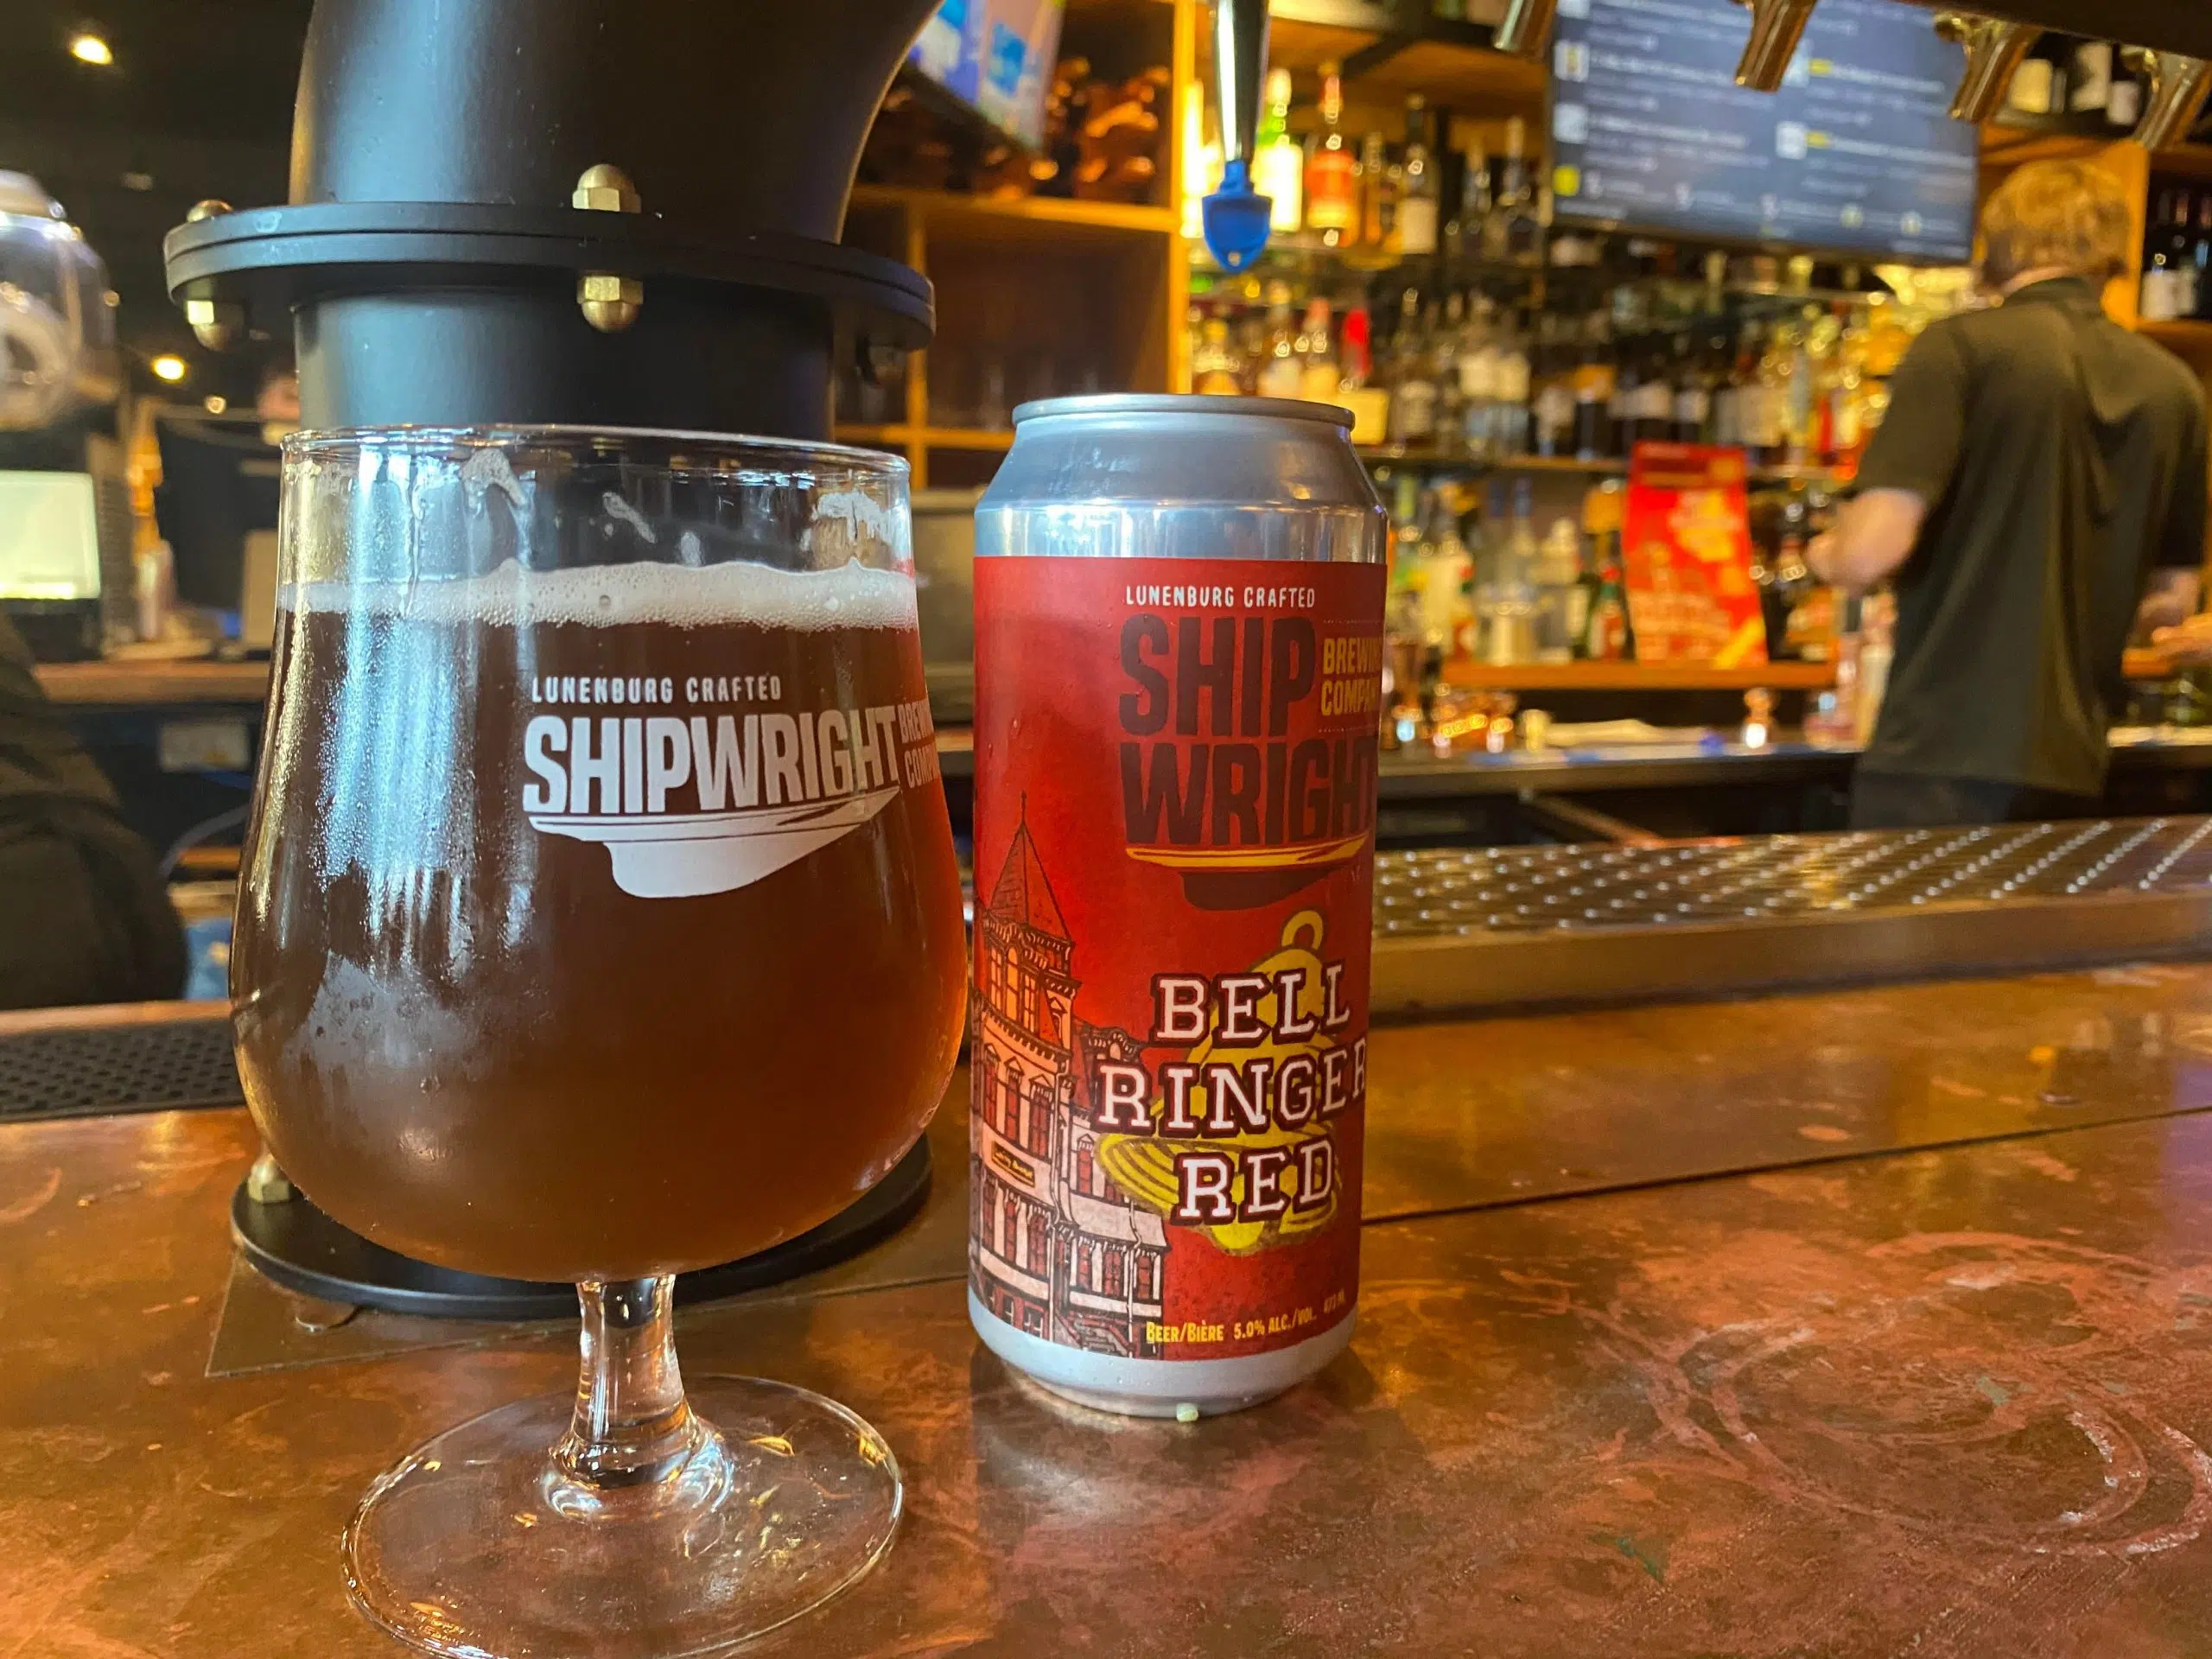 New Bell Ringer Red beer launches in support of Lunenburg Academy